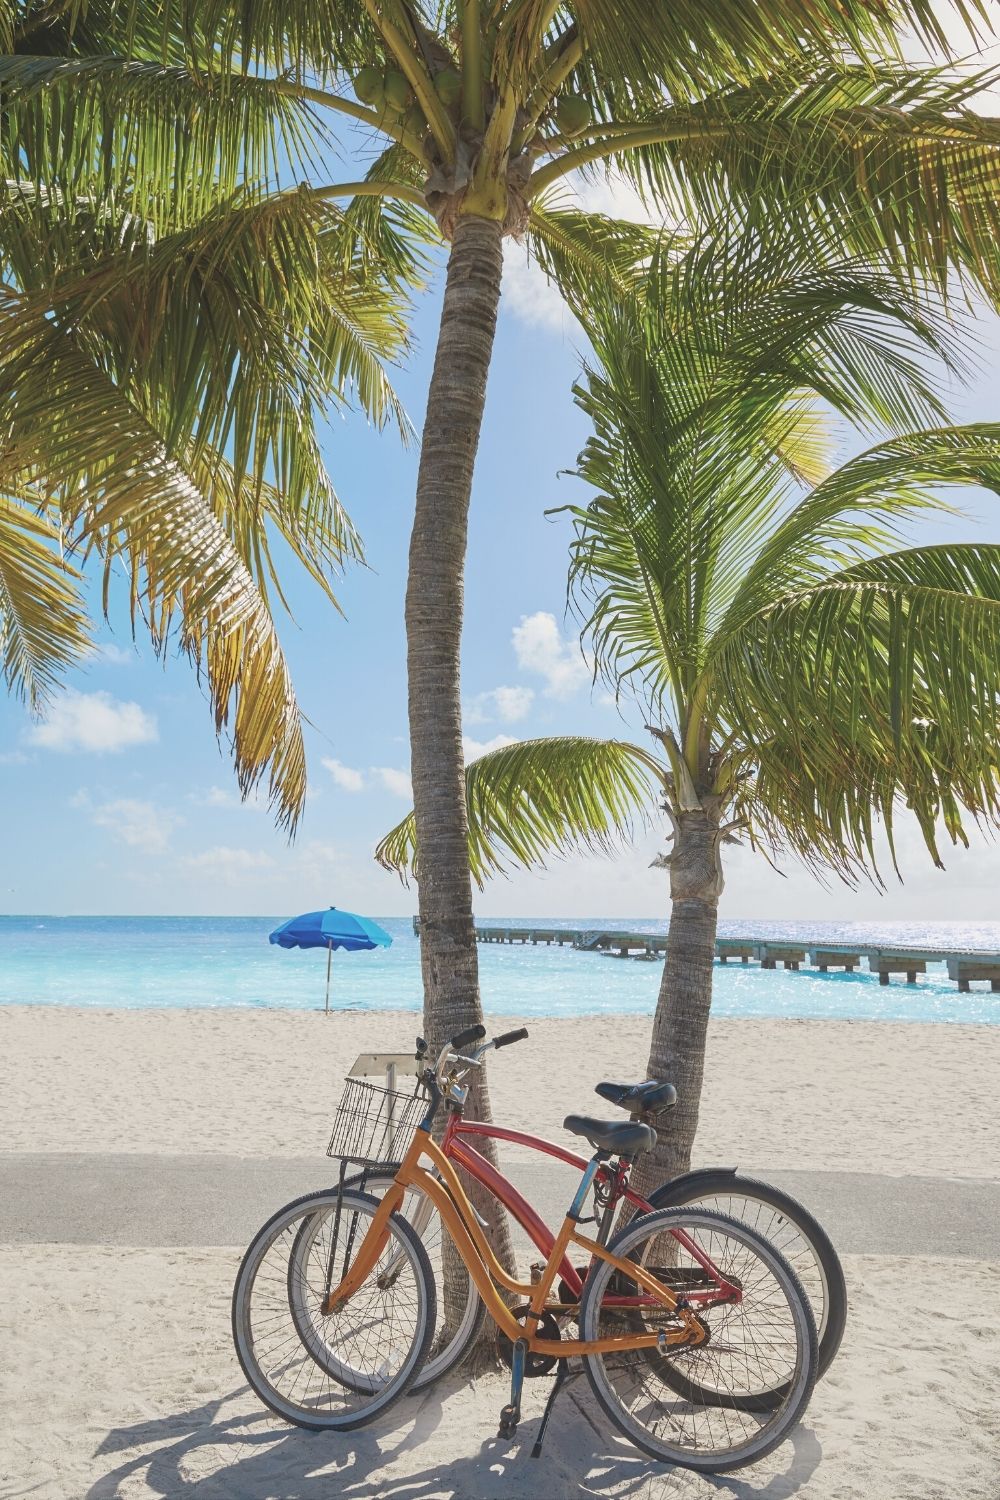 12 Best Summer Vacations In The USA - Key West Bikes